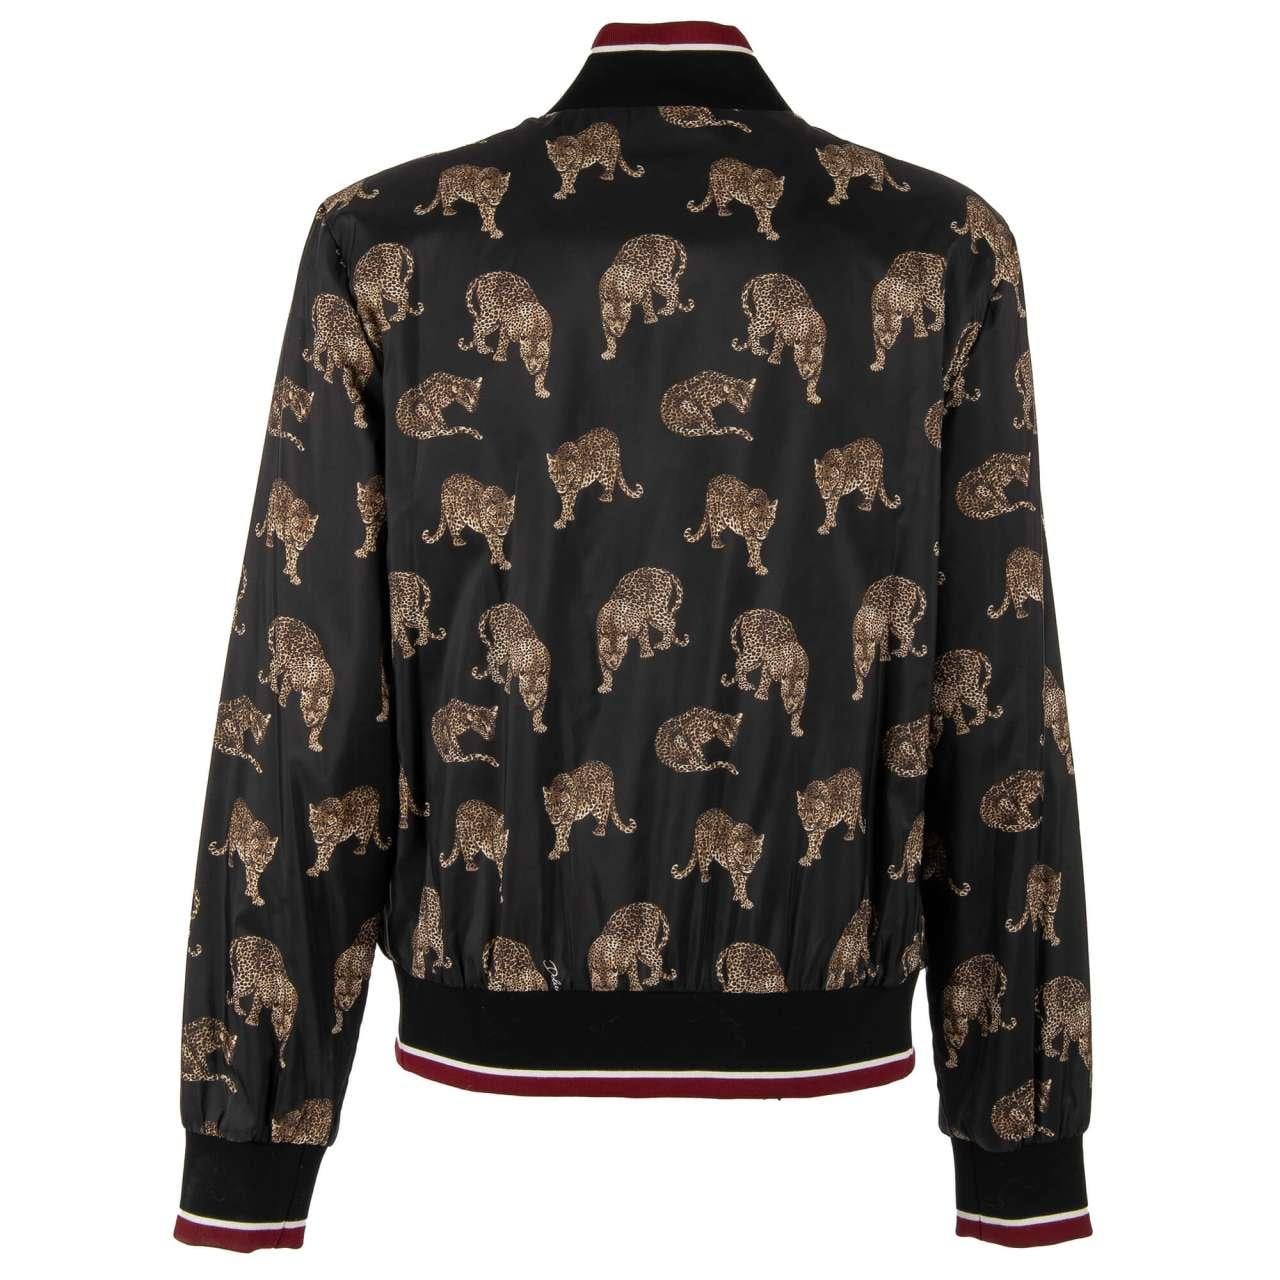 - Leopards printed padded bomber jacket with pockets and knit details by DOLCE & GABBANA - New with tag - Regular Fit - MADE IN ITALY - Model: G9MG7T-G7WD0-S9001 - Material: 100% Polyester - Lining / Stuffing: 100% Polyester - Knit: 96% Cotton, 4%